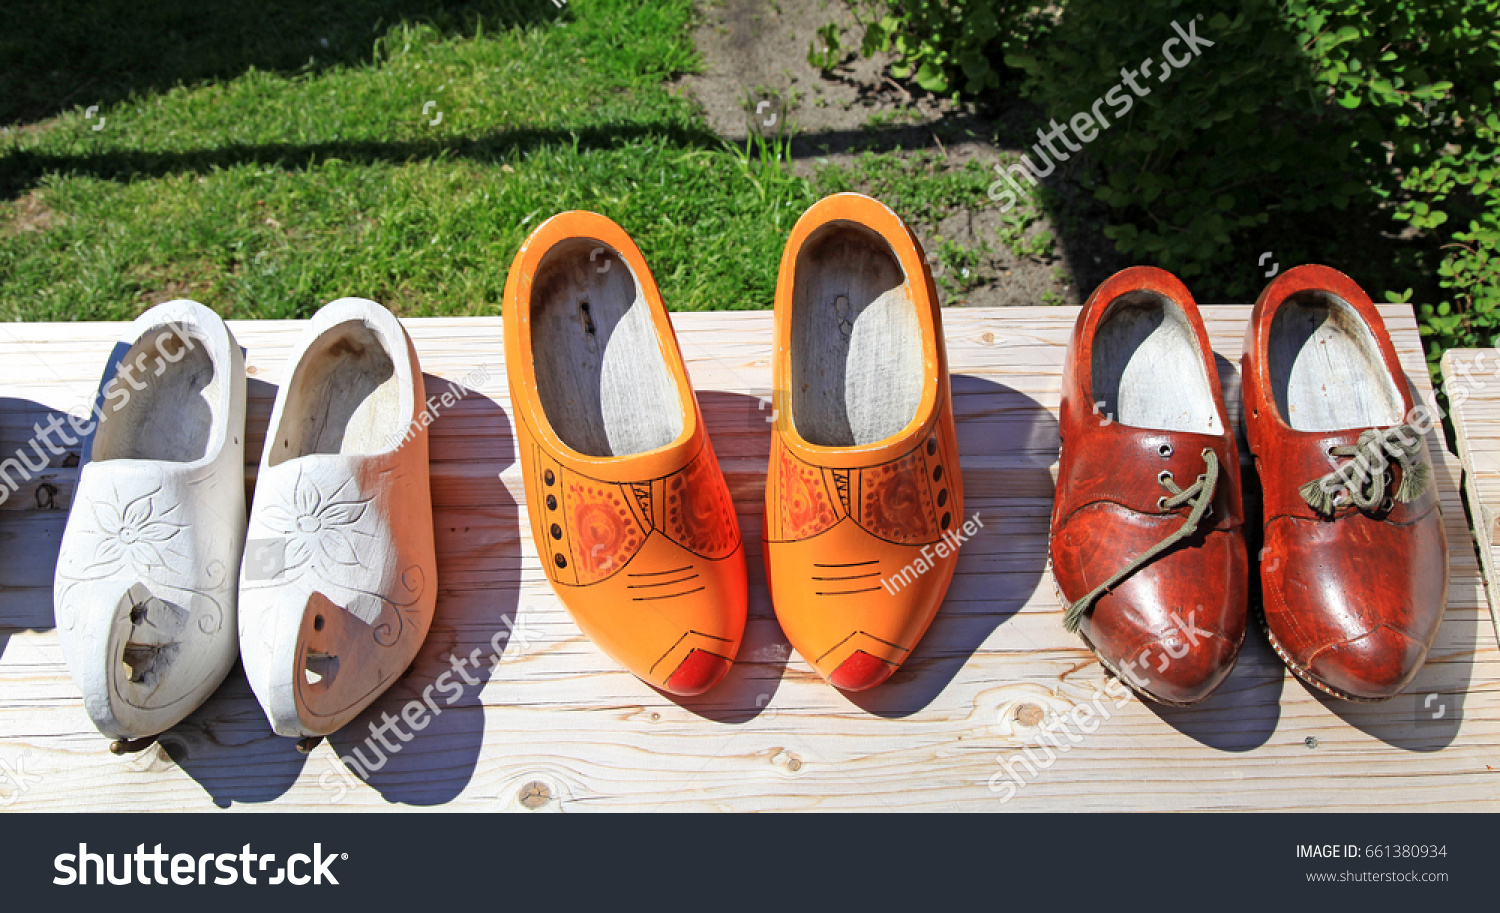 wooden shoes brand